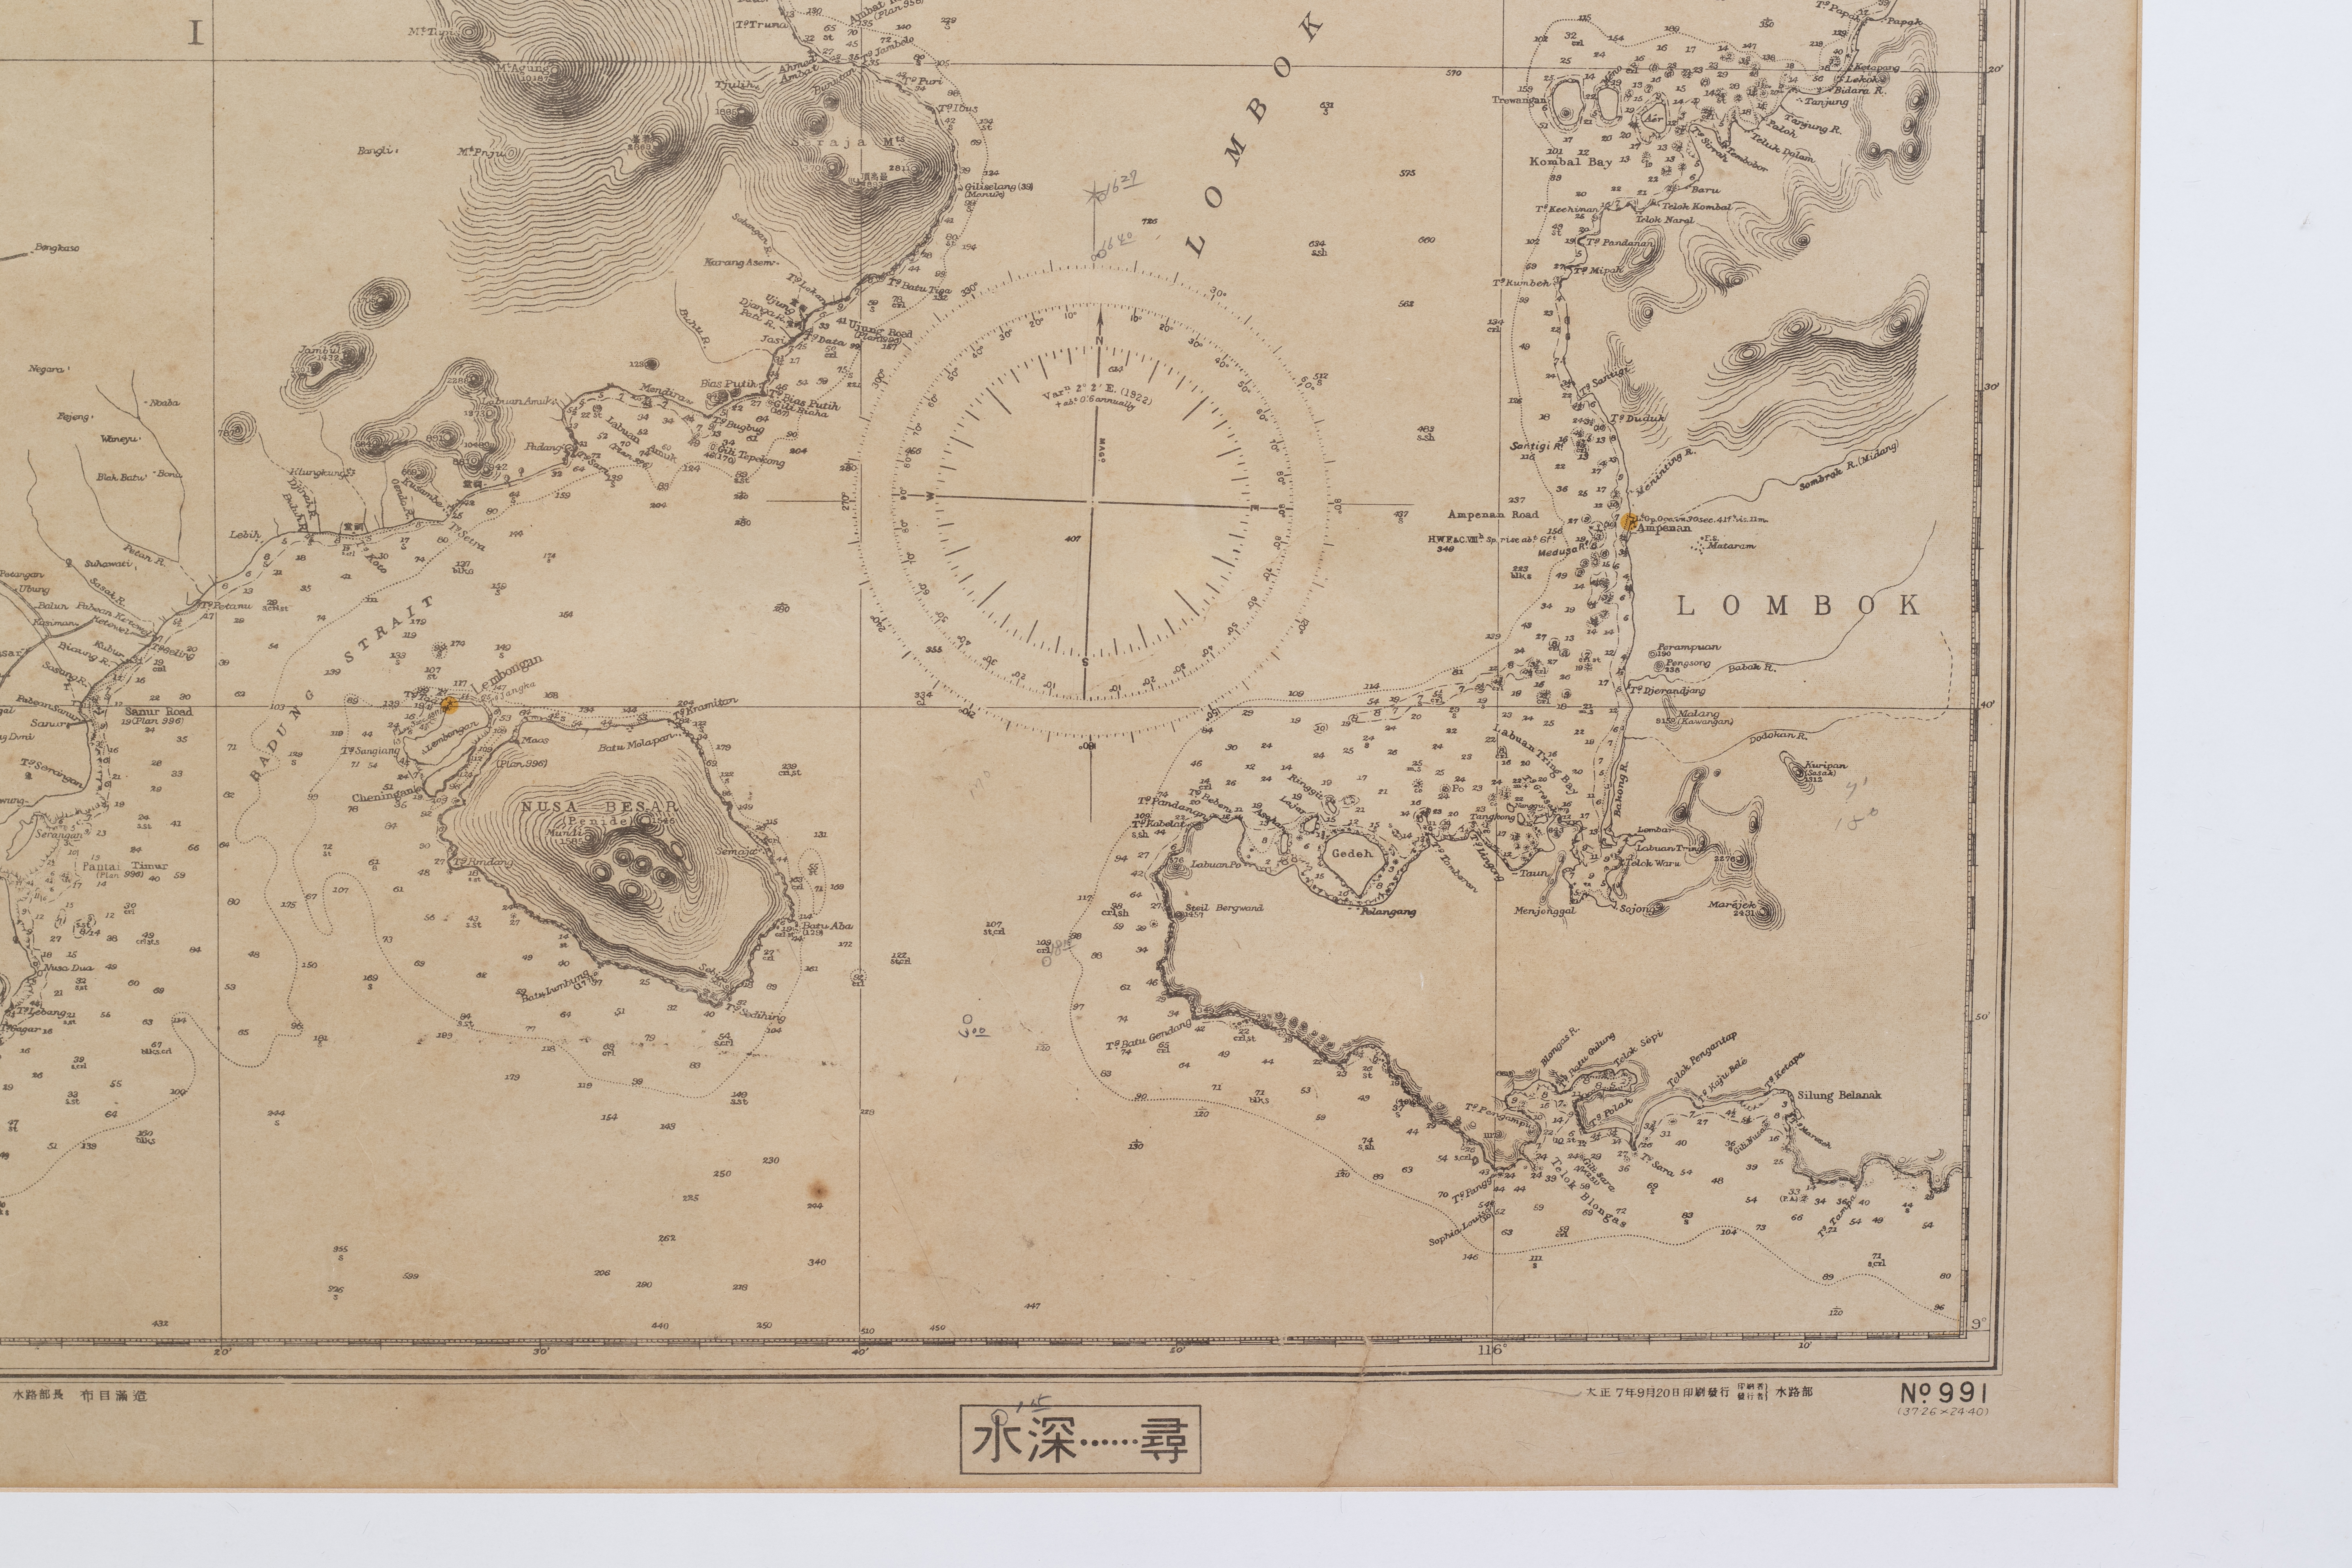 A JAPANESE WARTIME NAUTICAL CHART OF BALI - Image 5 of 6